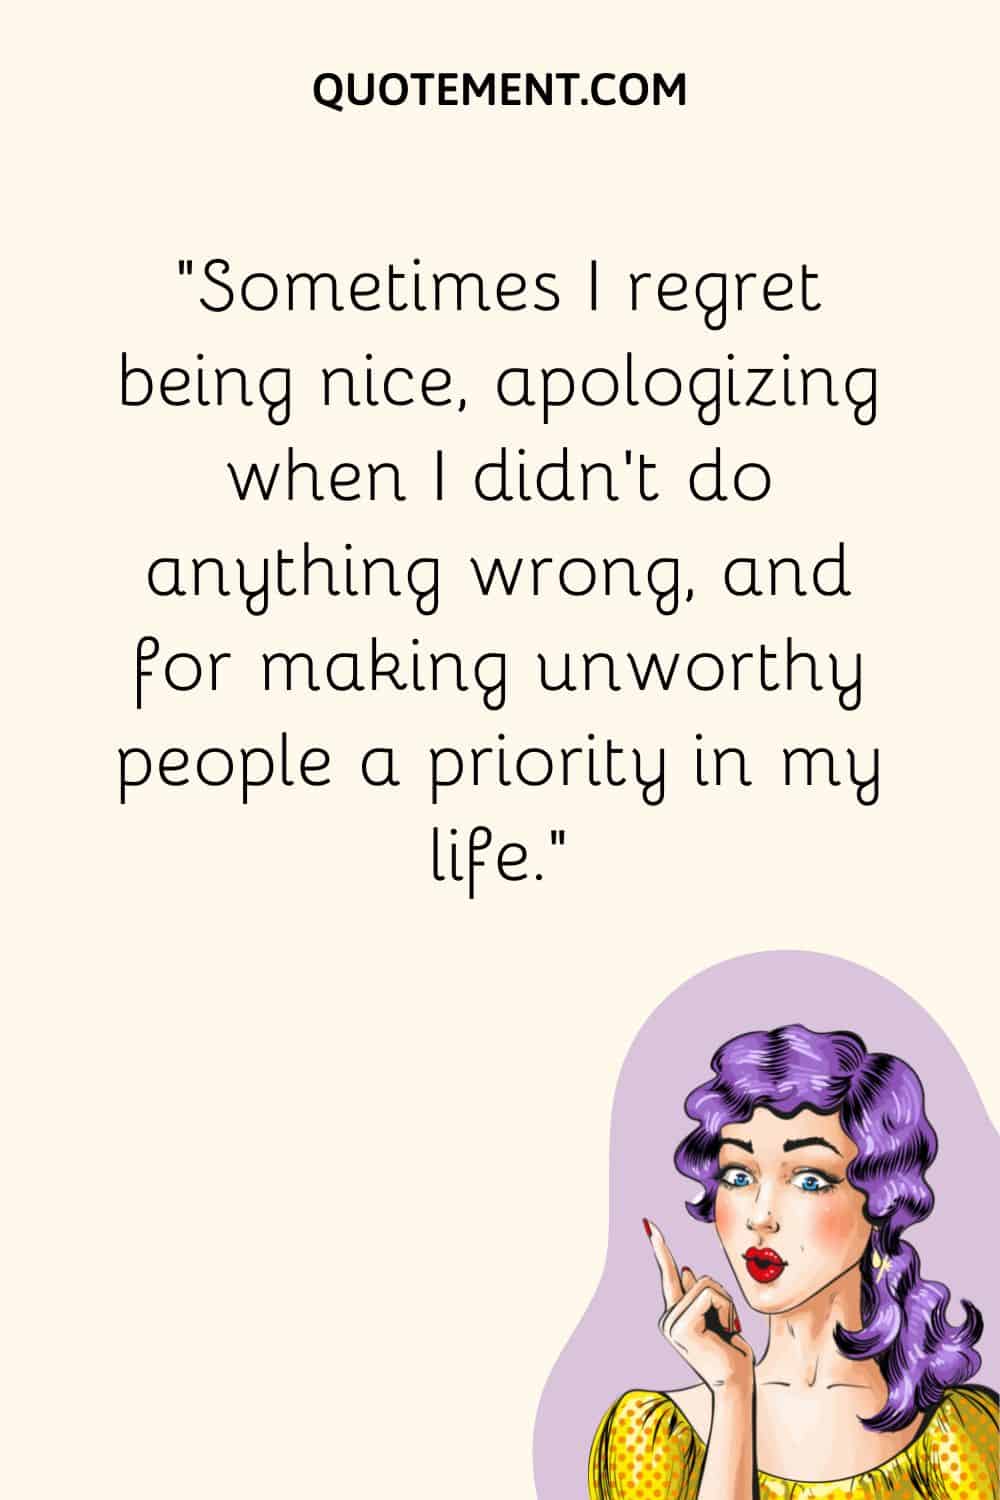 Sometimes I regret being nice, apologizing when I didn’t do anything wrong, and for making unworthy people a priority in my life.